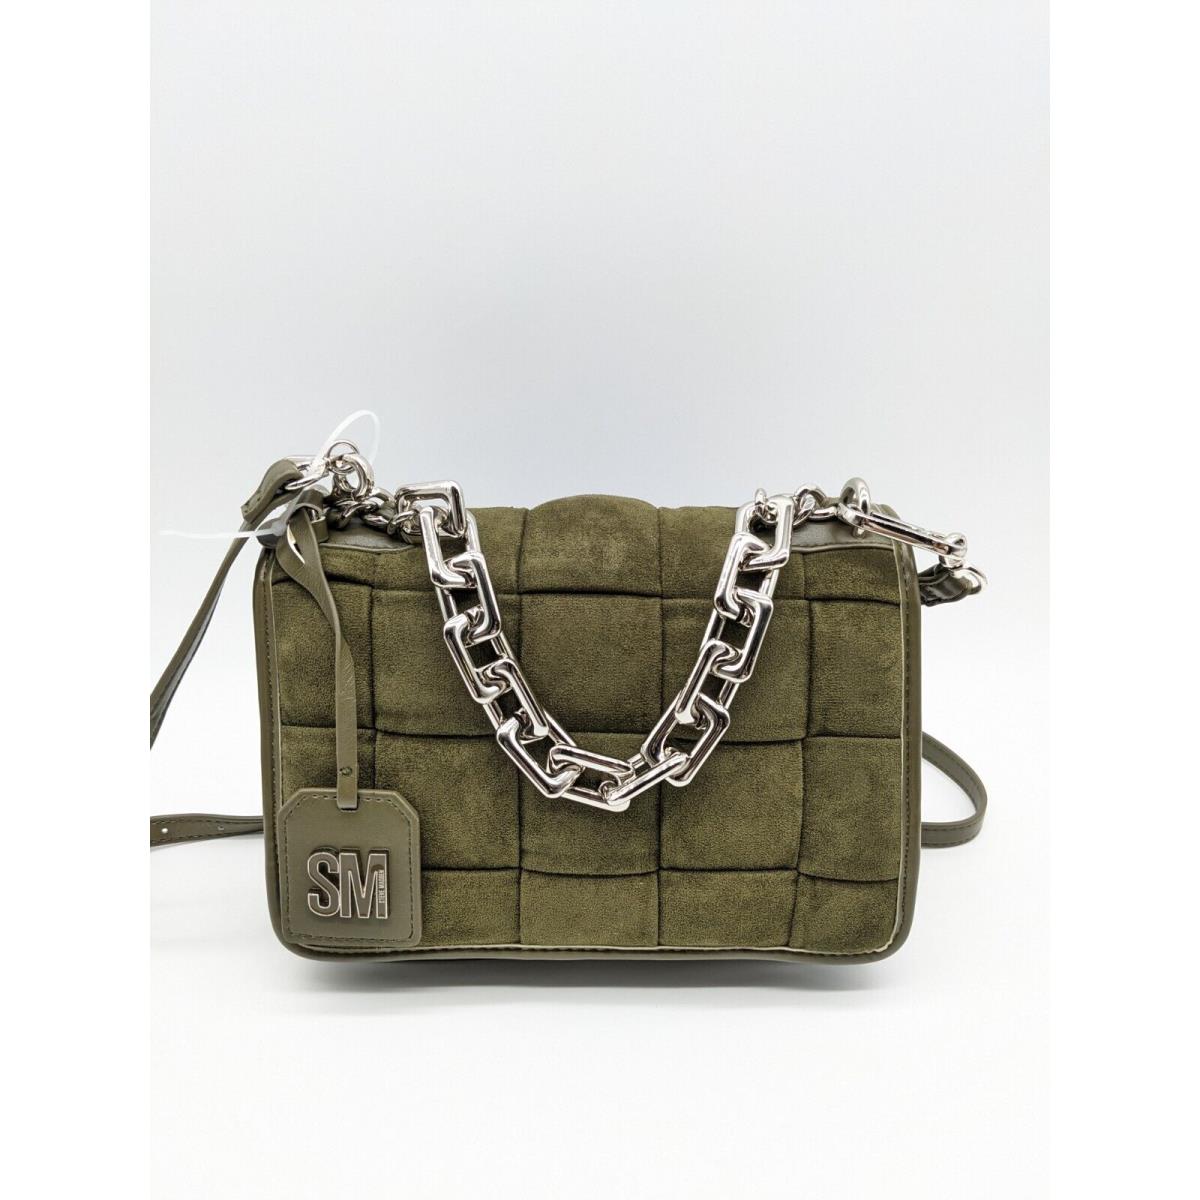 Steve Madden Bmatters Woven Suede Chain Link Satchel Crossbody Bag -olive Green